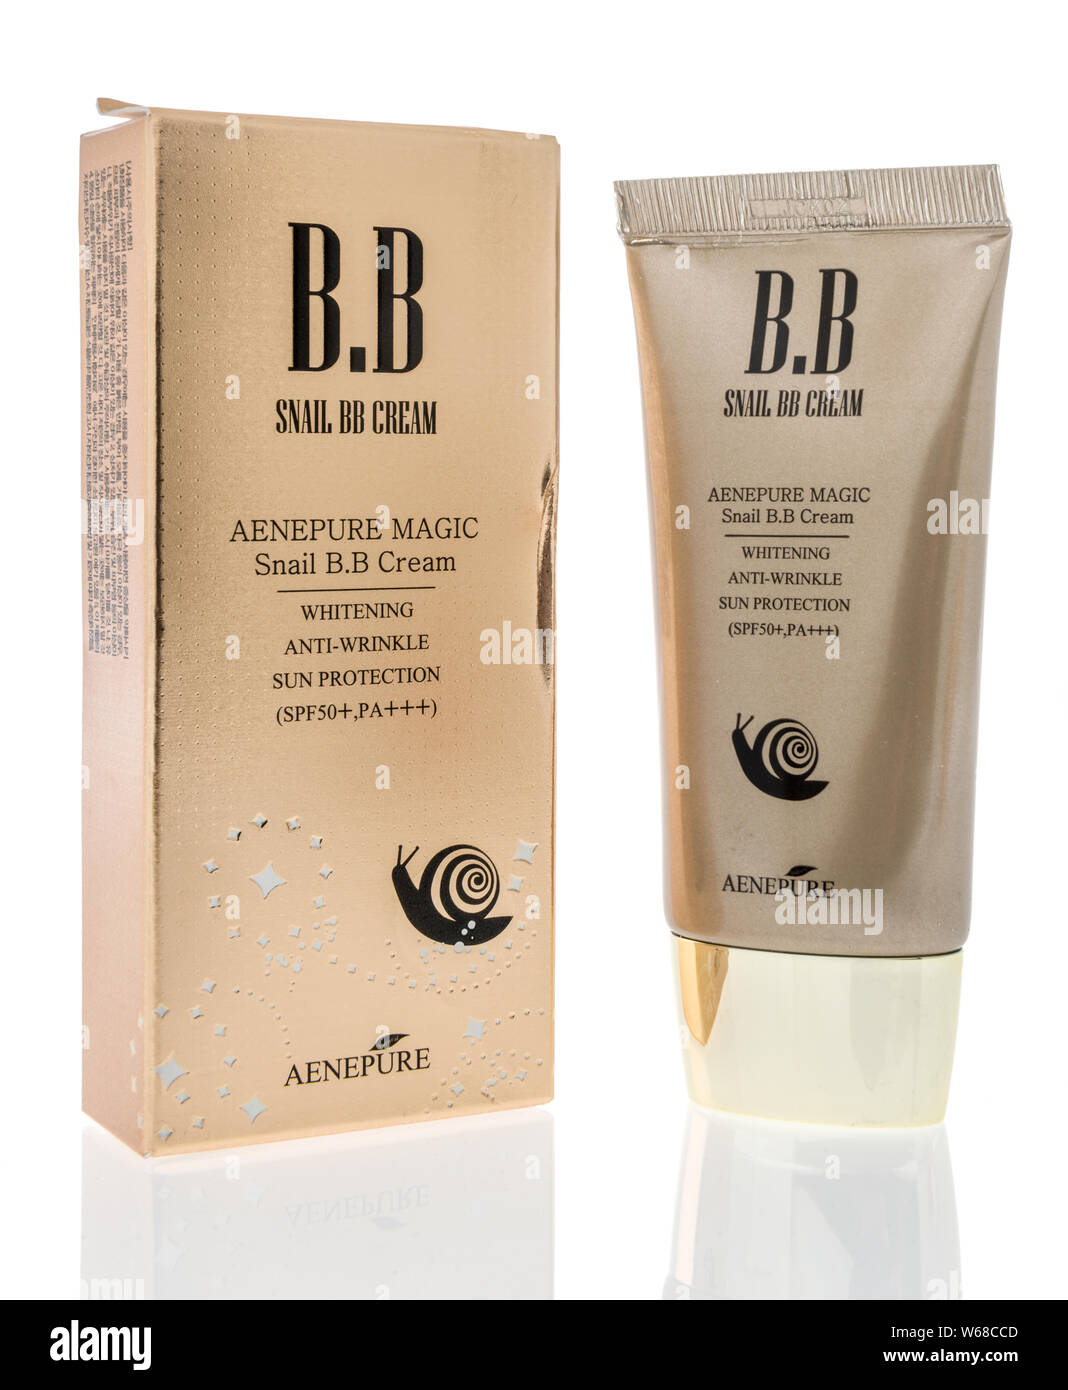 Winneconne, WI - 29 June 2019 : A package of b.b aenepure magic anti-wrinkle cream on an isolated background Stock Photo